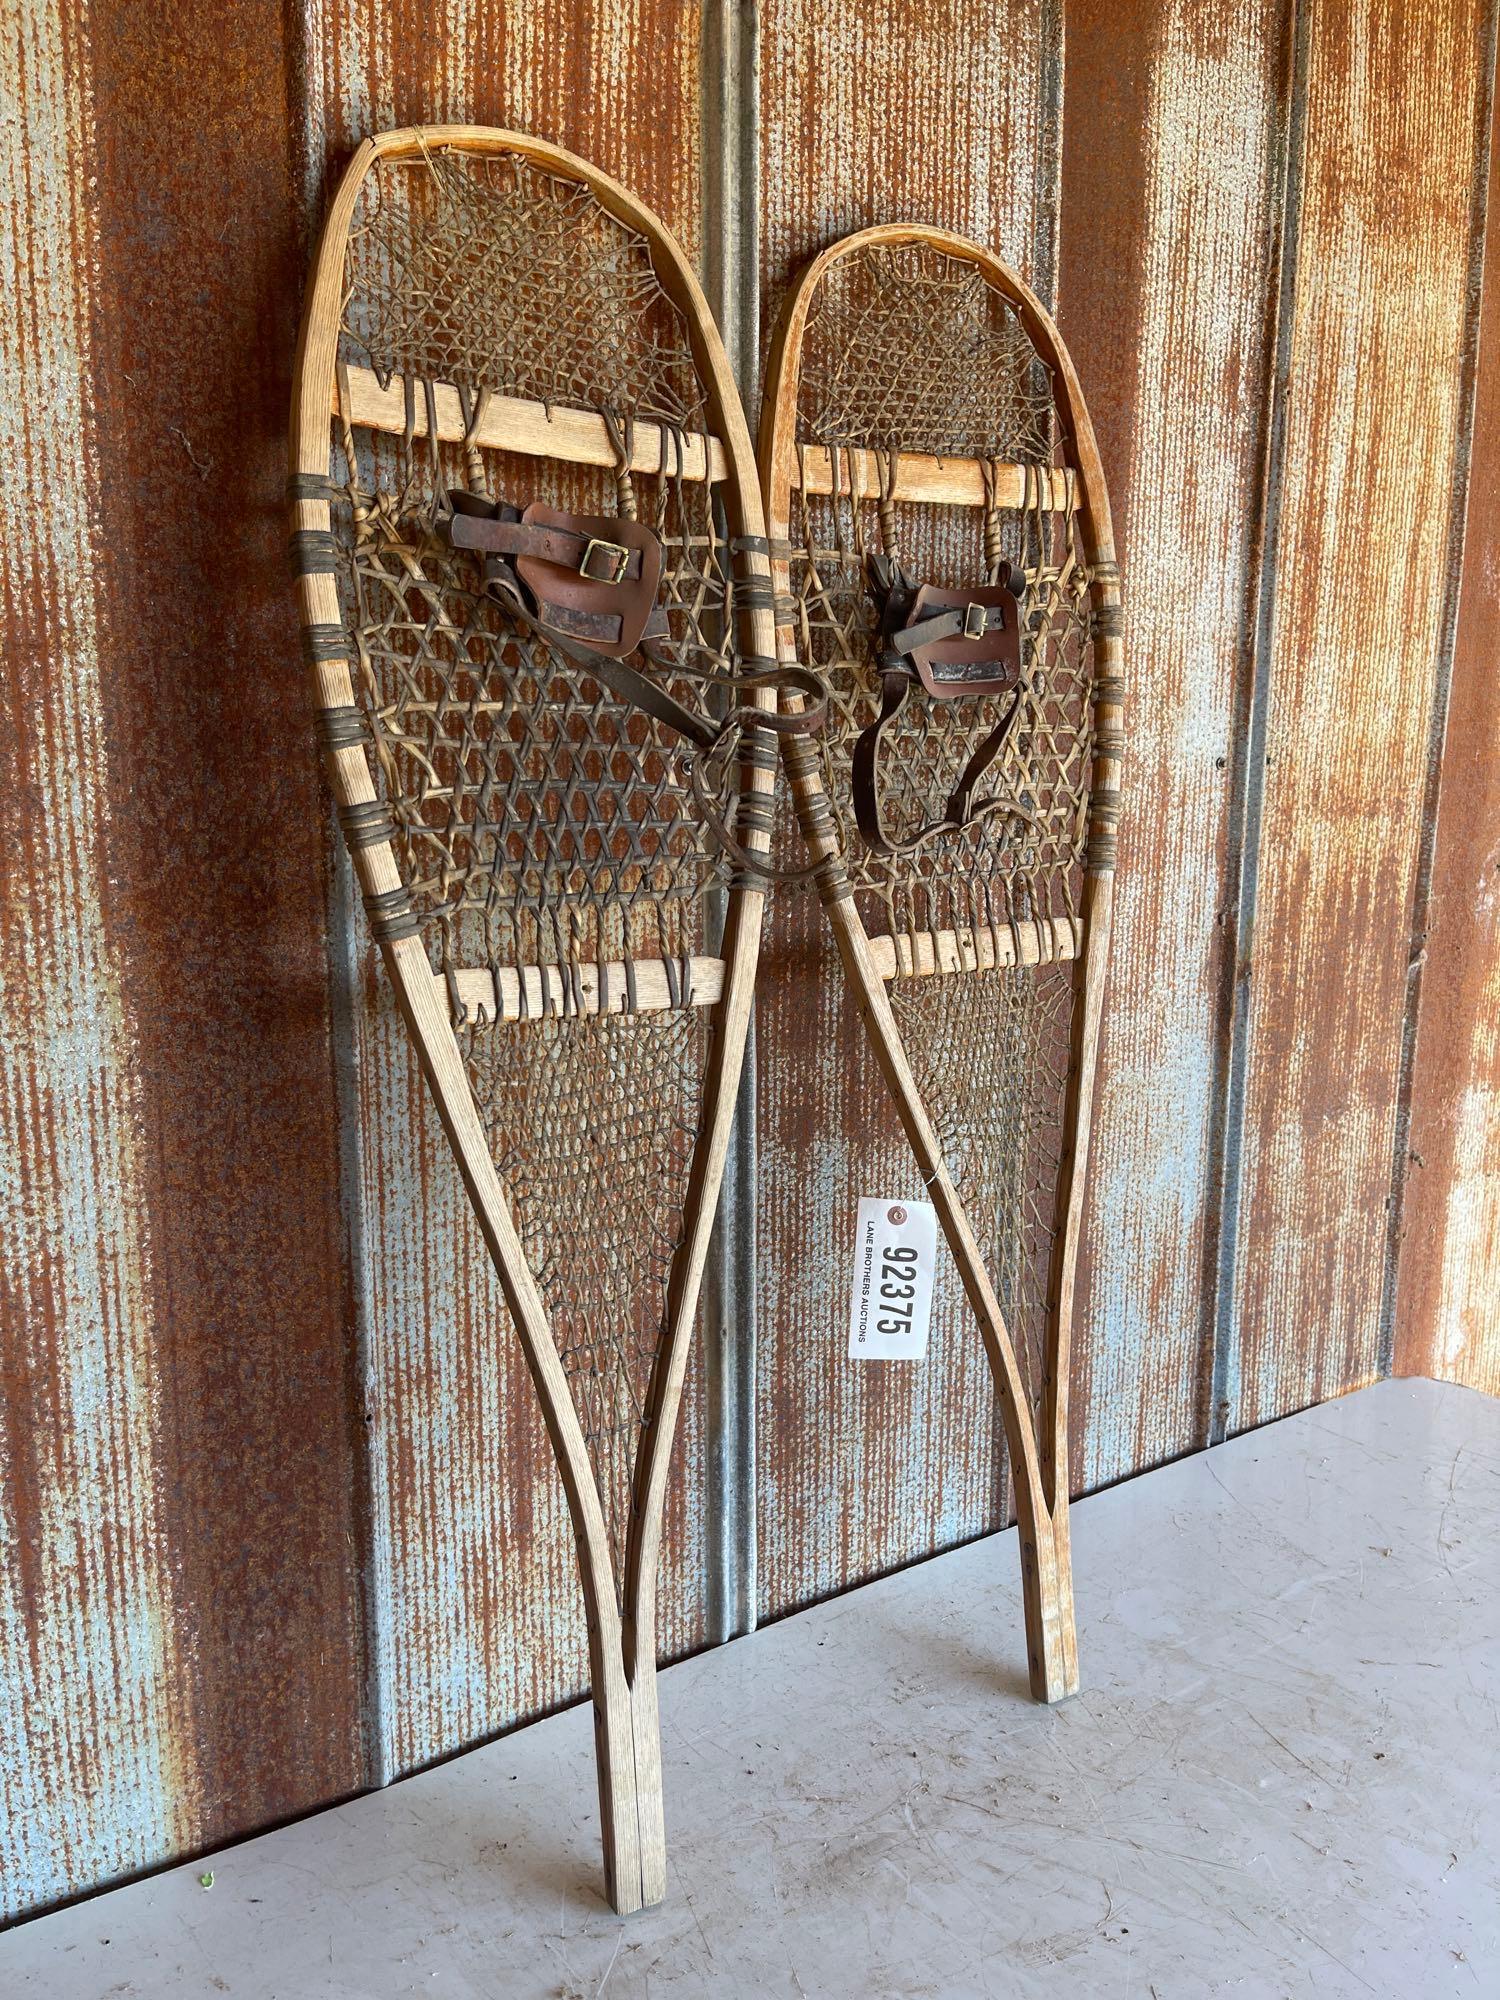 1 - PAIR OF WOODEN SNOW SHOES